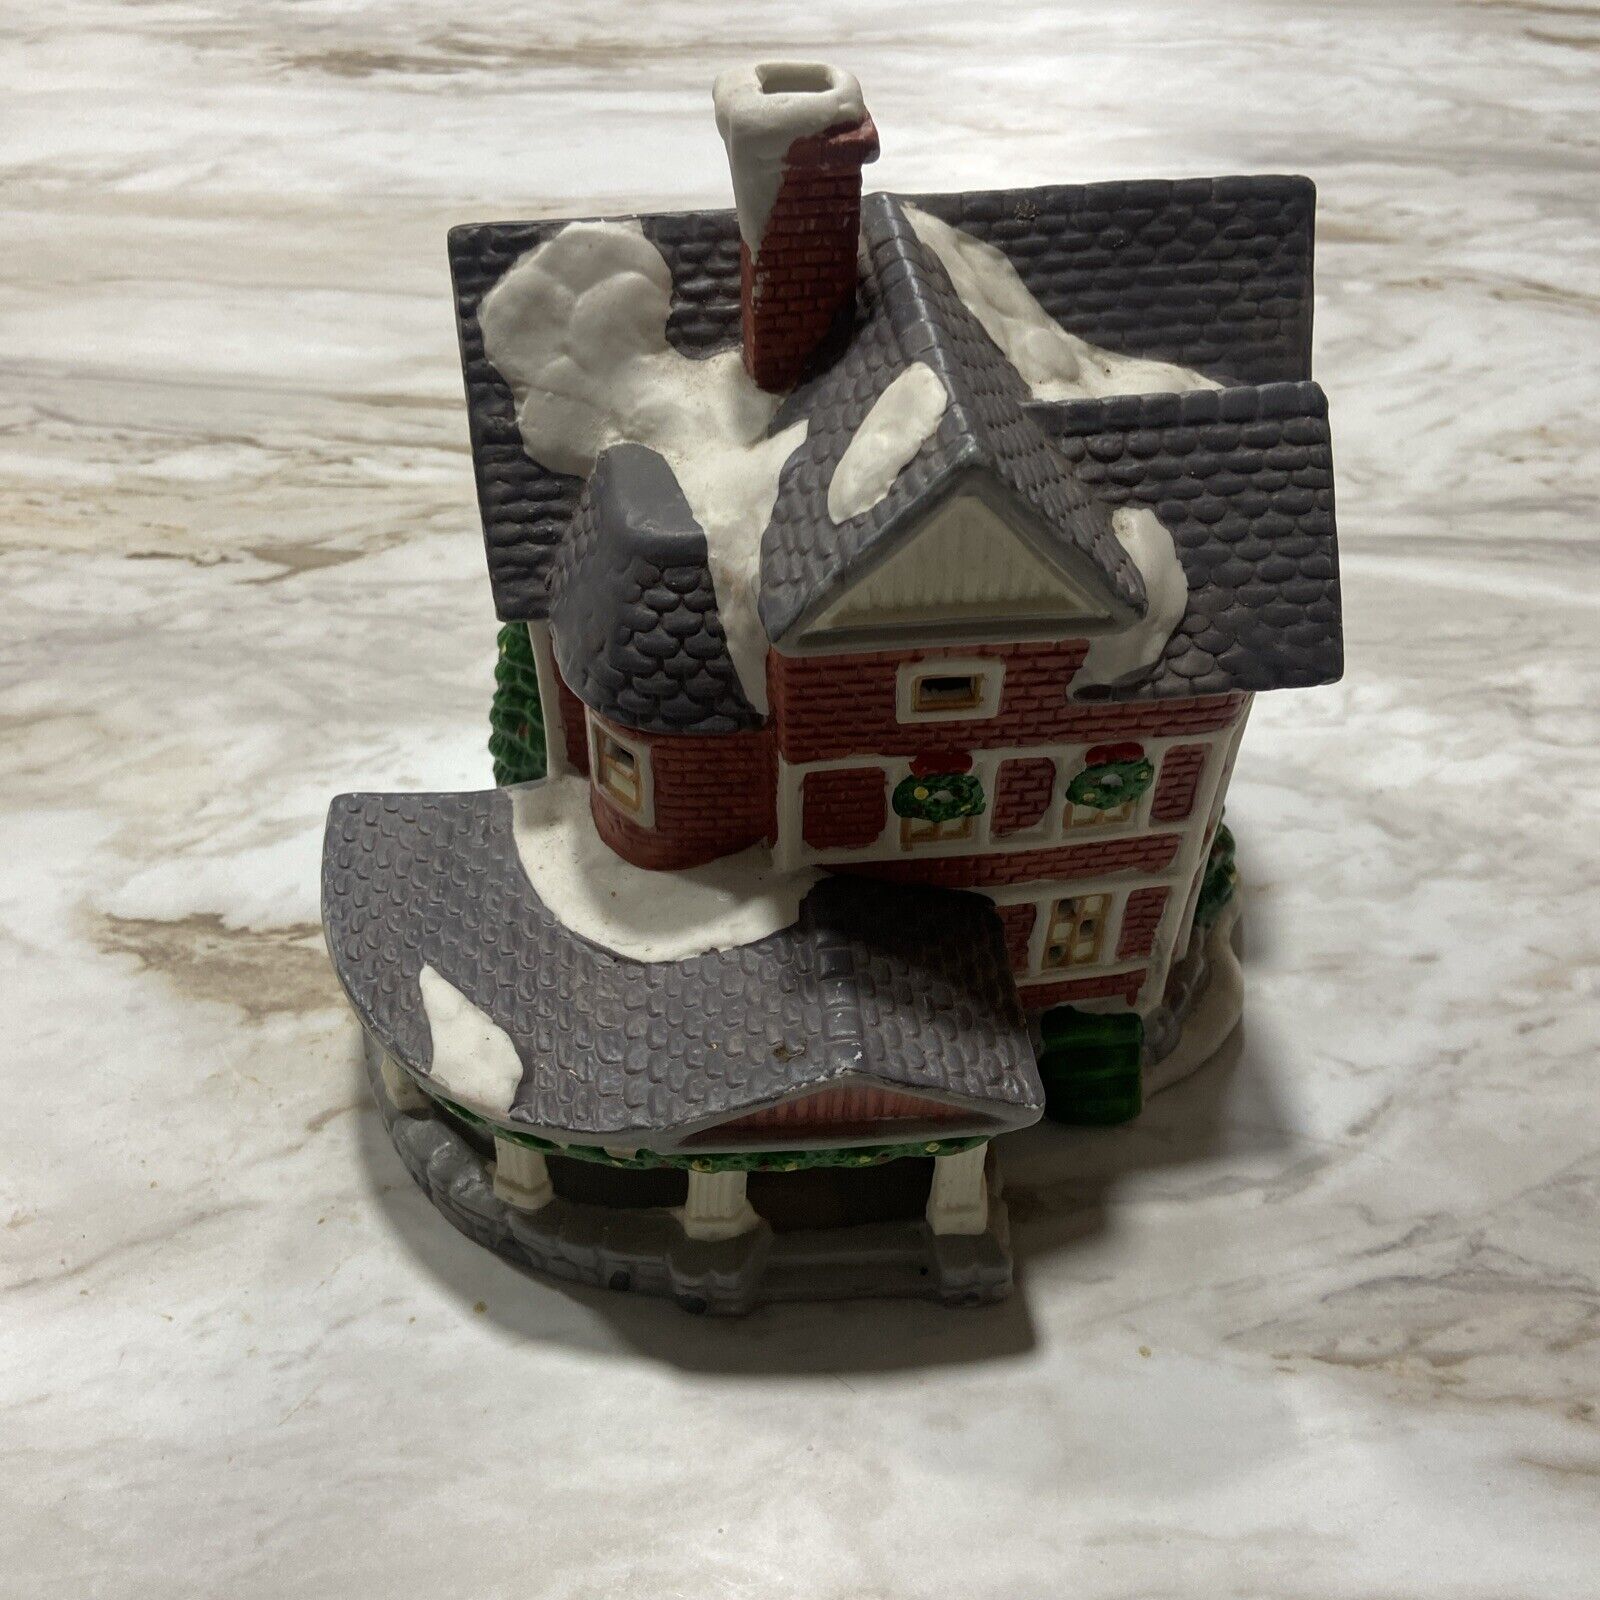 Lemax Dickensvale Collectibles Porcelain Lighted House 